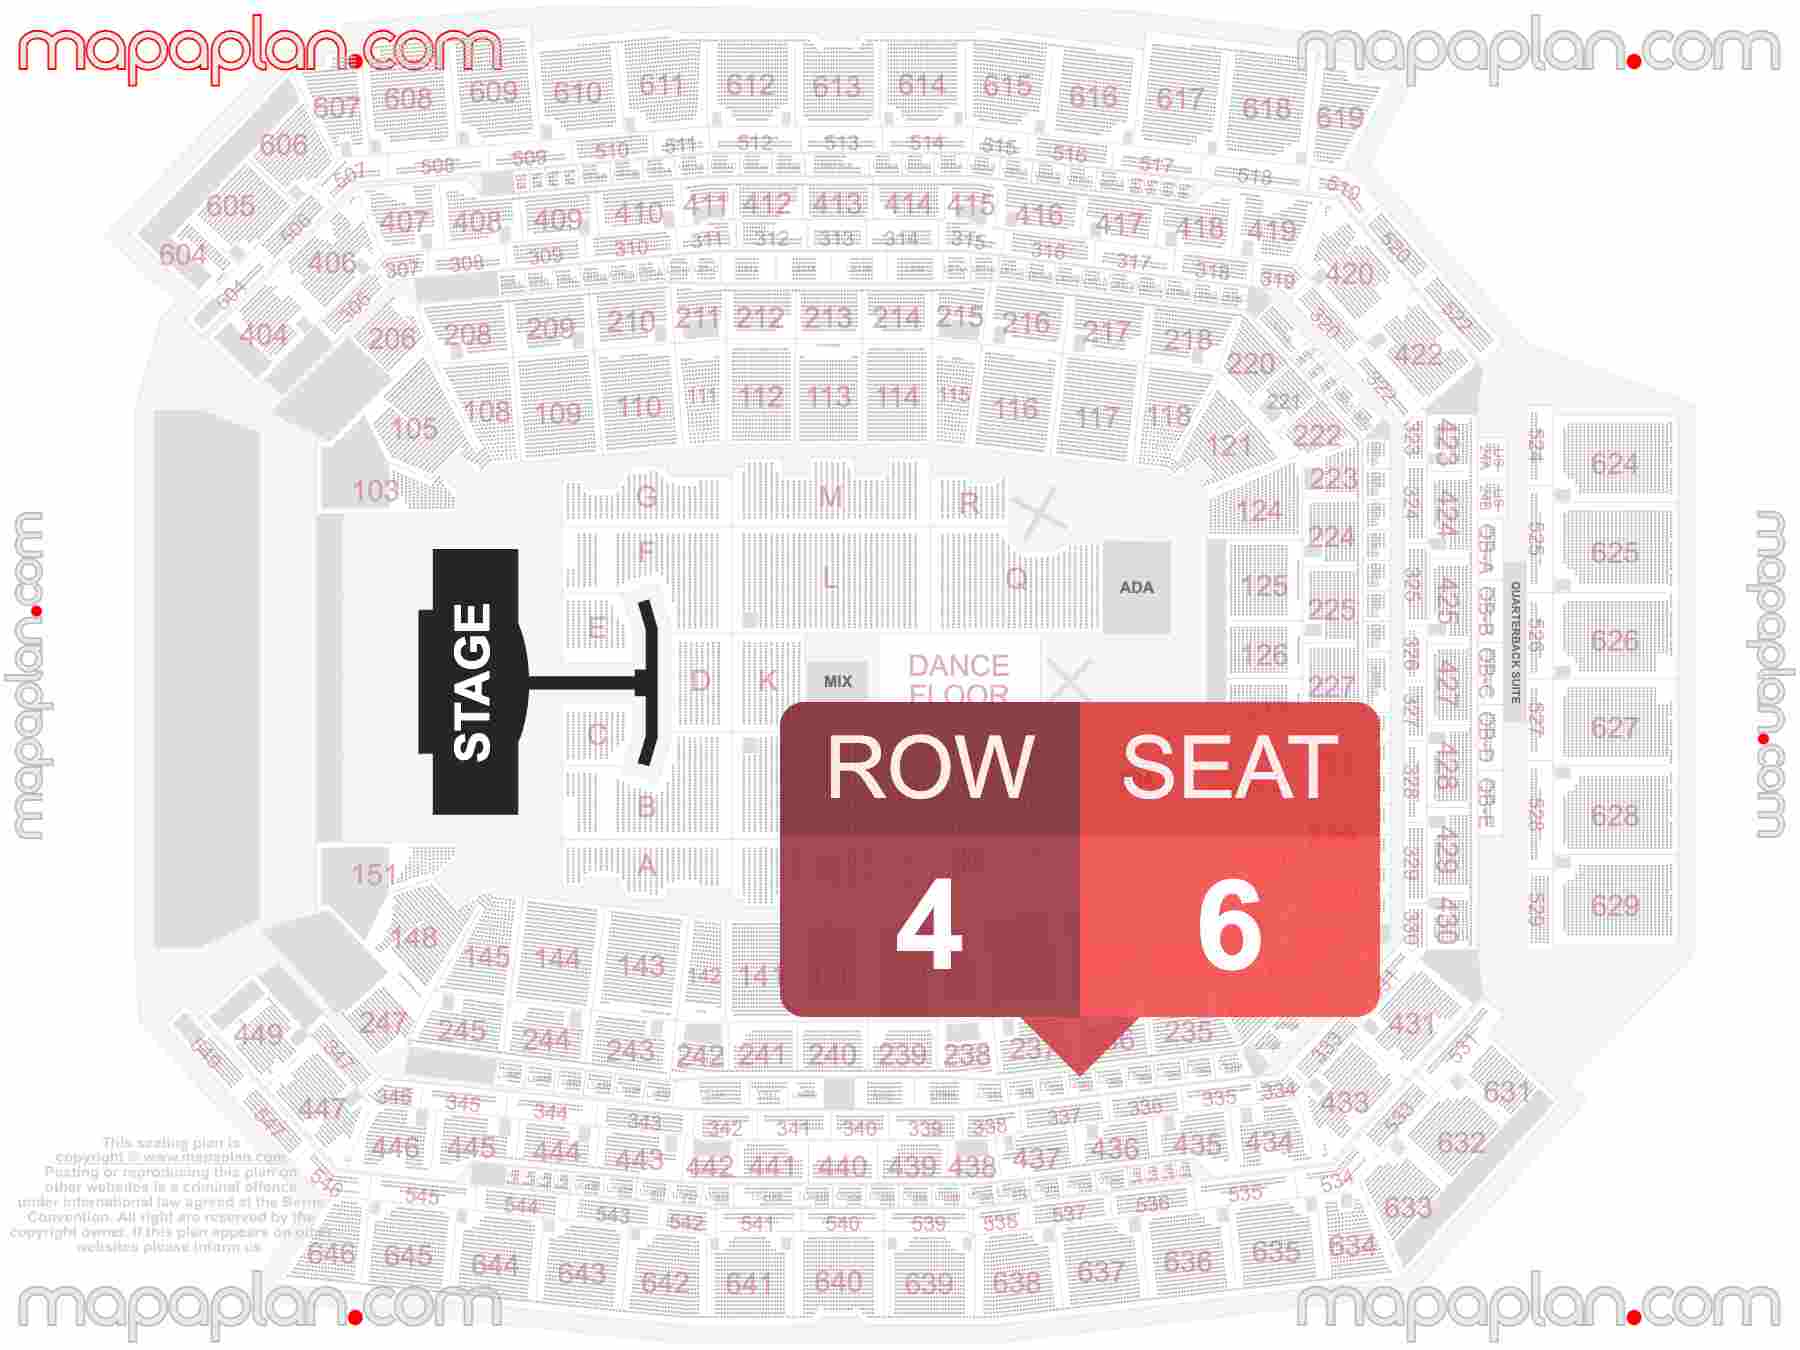 Indianapolis Lucas Oil Stadium seating chart Concert with extended catwalk runway B-stage inside capacity view arrangement plan - Interactive virtual 3d best seats & rows detailed stadium image configuration layout